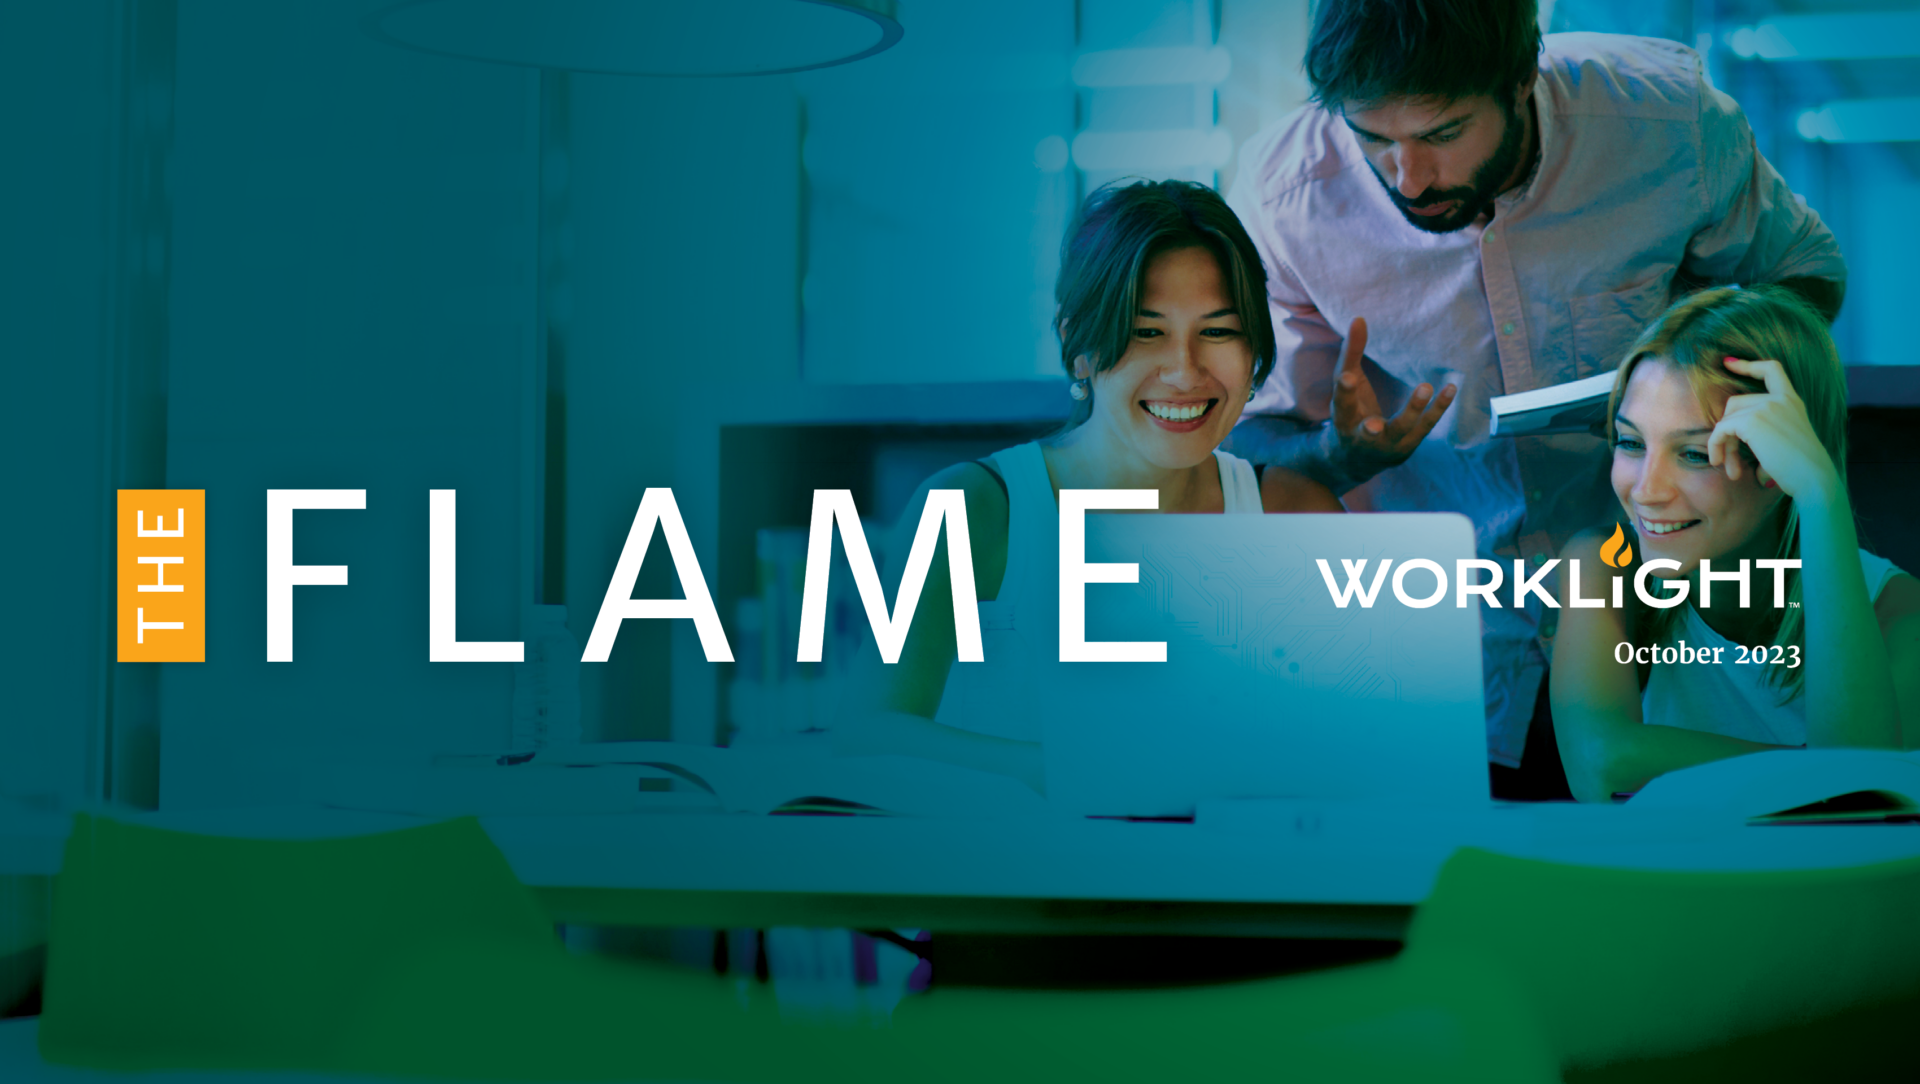 a man and two women looking at a computer screen. Over the image are the words "The Flame" and the WorkLight logo.